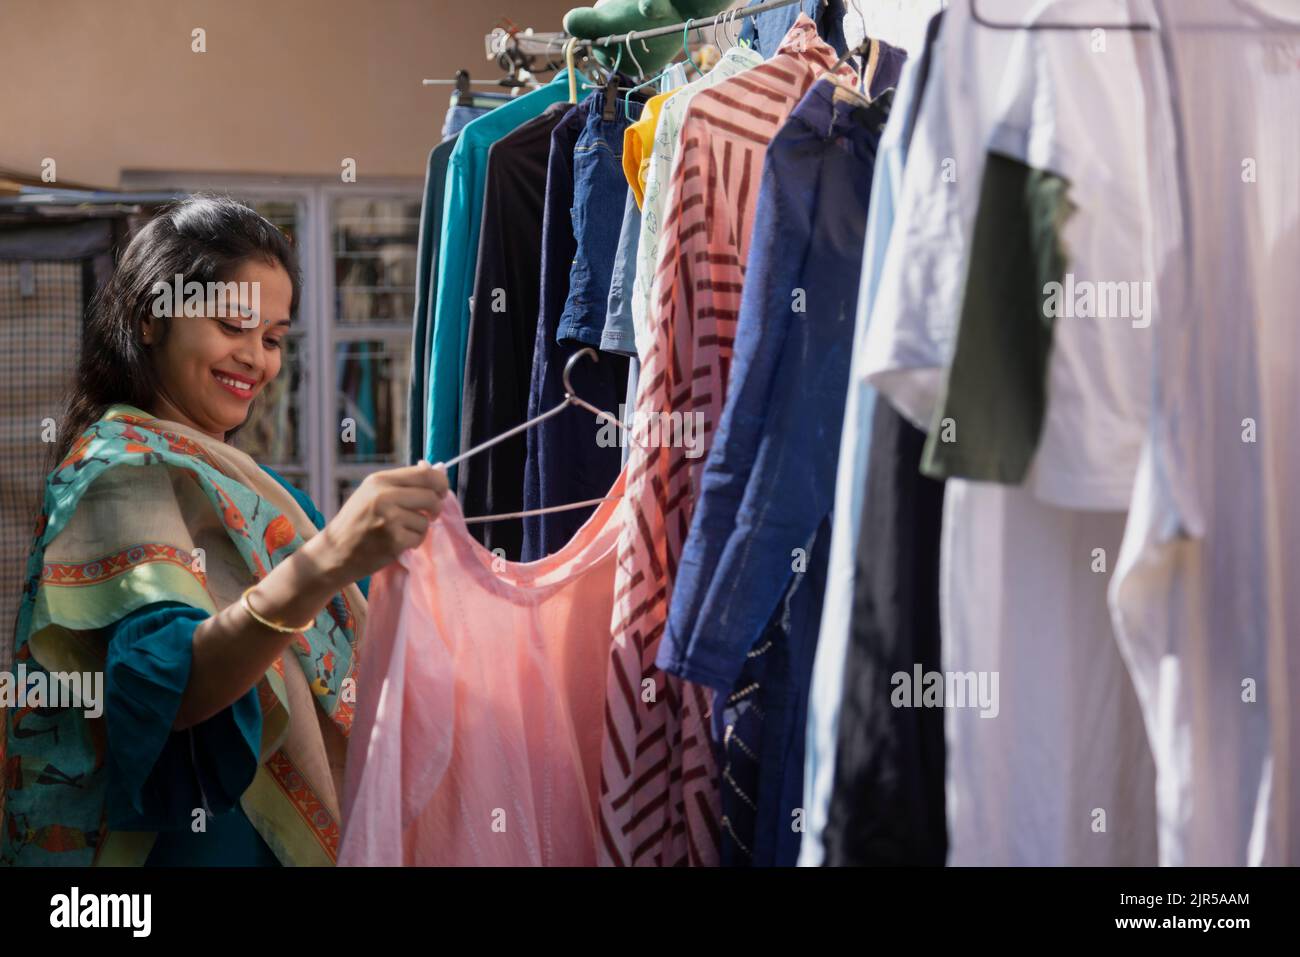 Young woman hanging clothes on washing line to dry outside Stock Photo